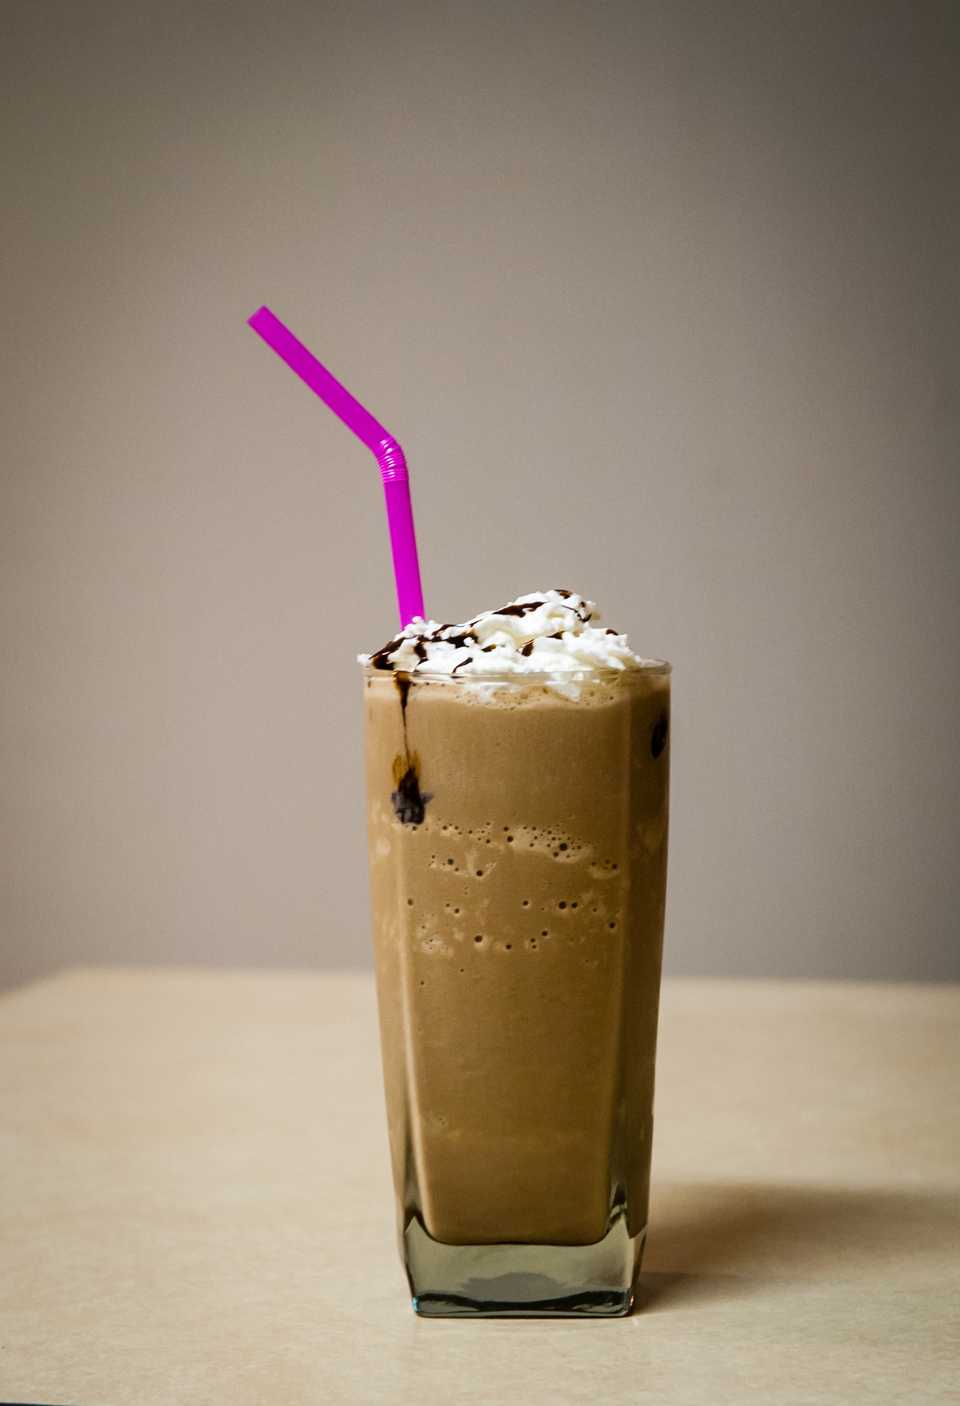 Cold coffee with a straw